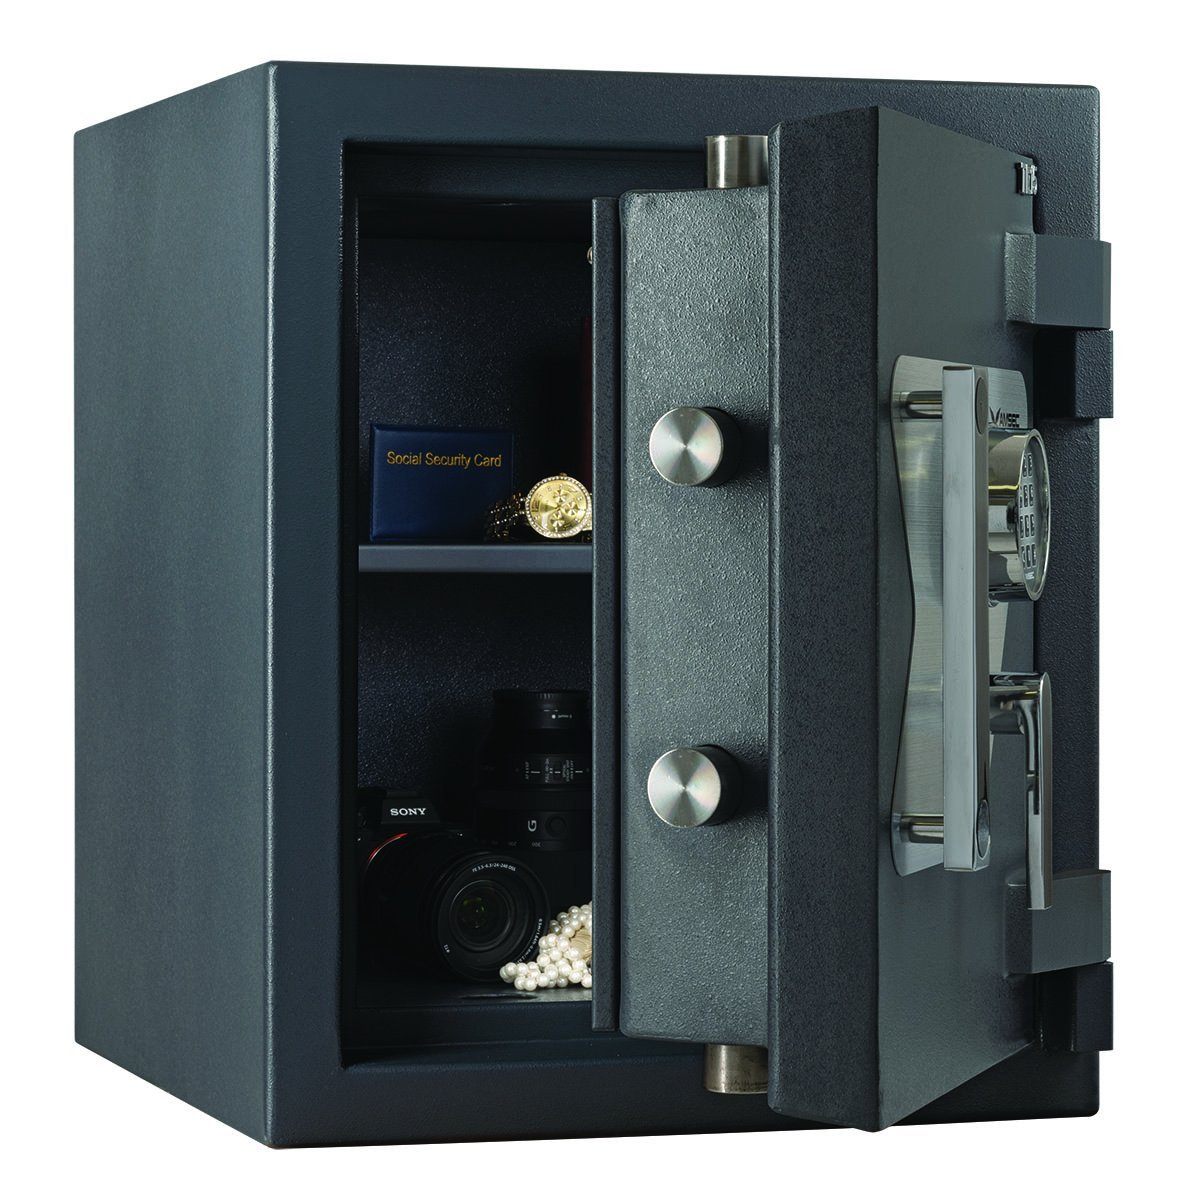 AMSEC MAX1814 High Security UL Listed TL-15 Composite Safe Door Open Full